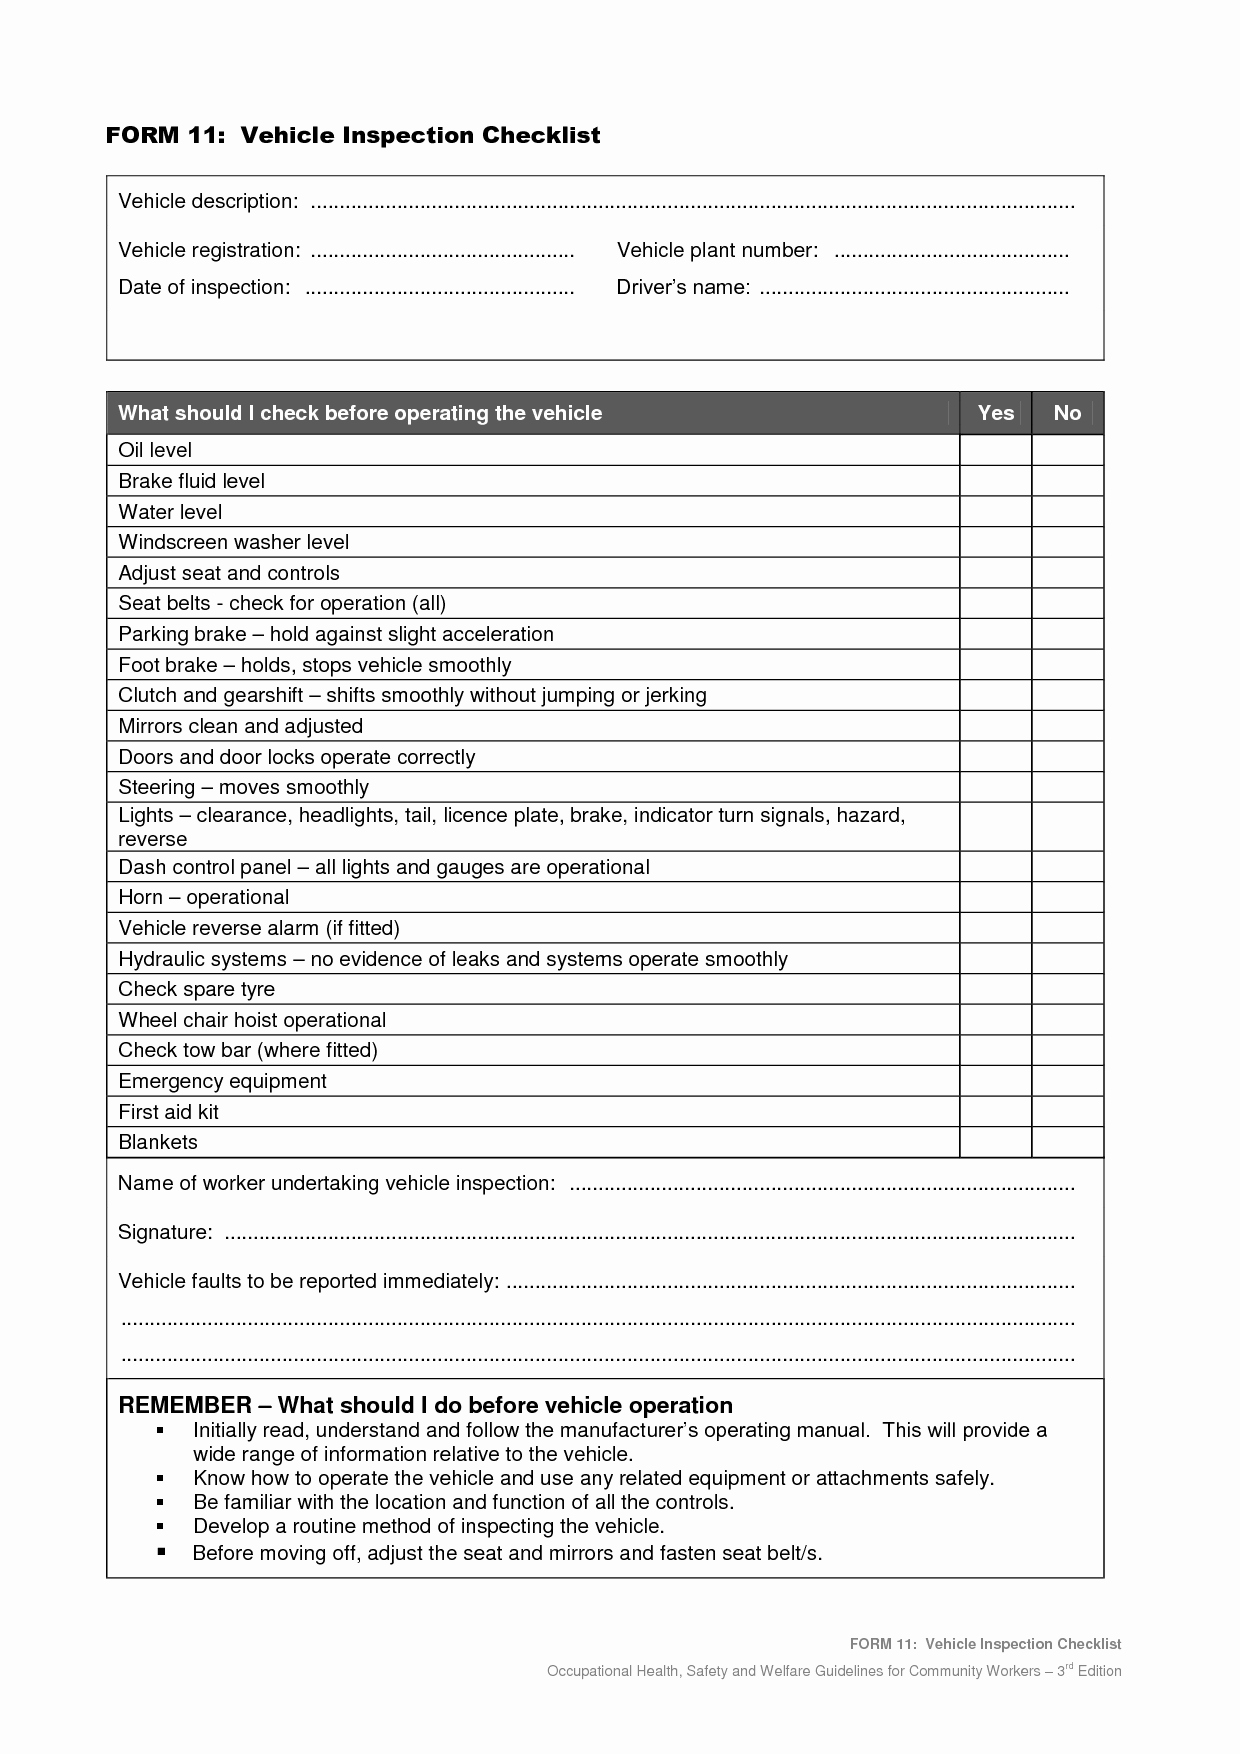 Car Inspection Checklist Template Best Of Vehicle Safety Inspection Checklist form